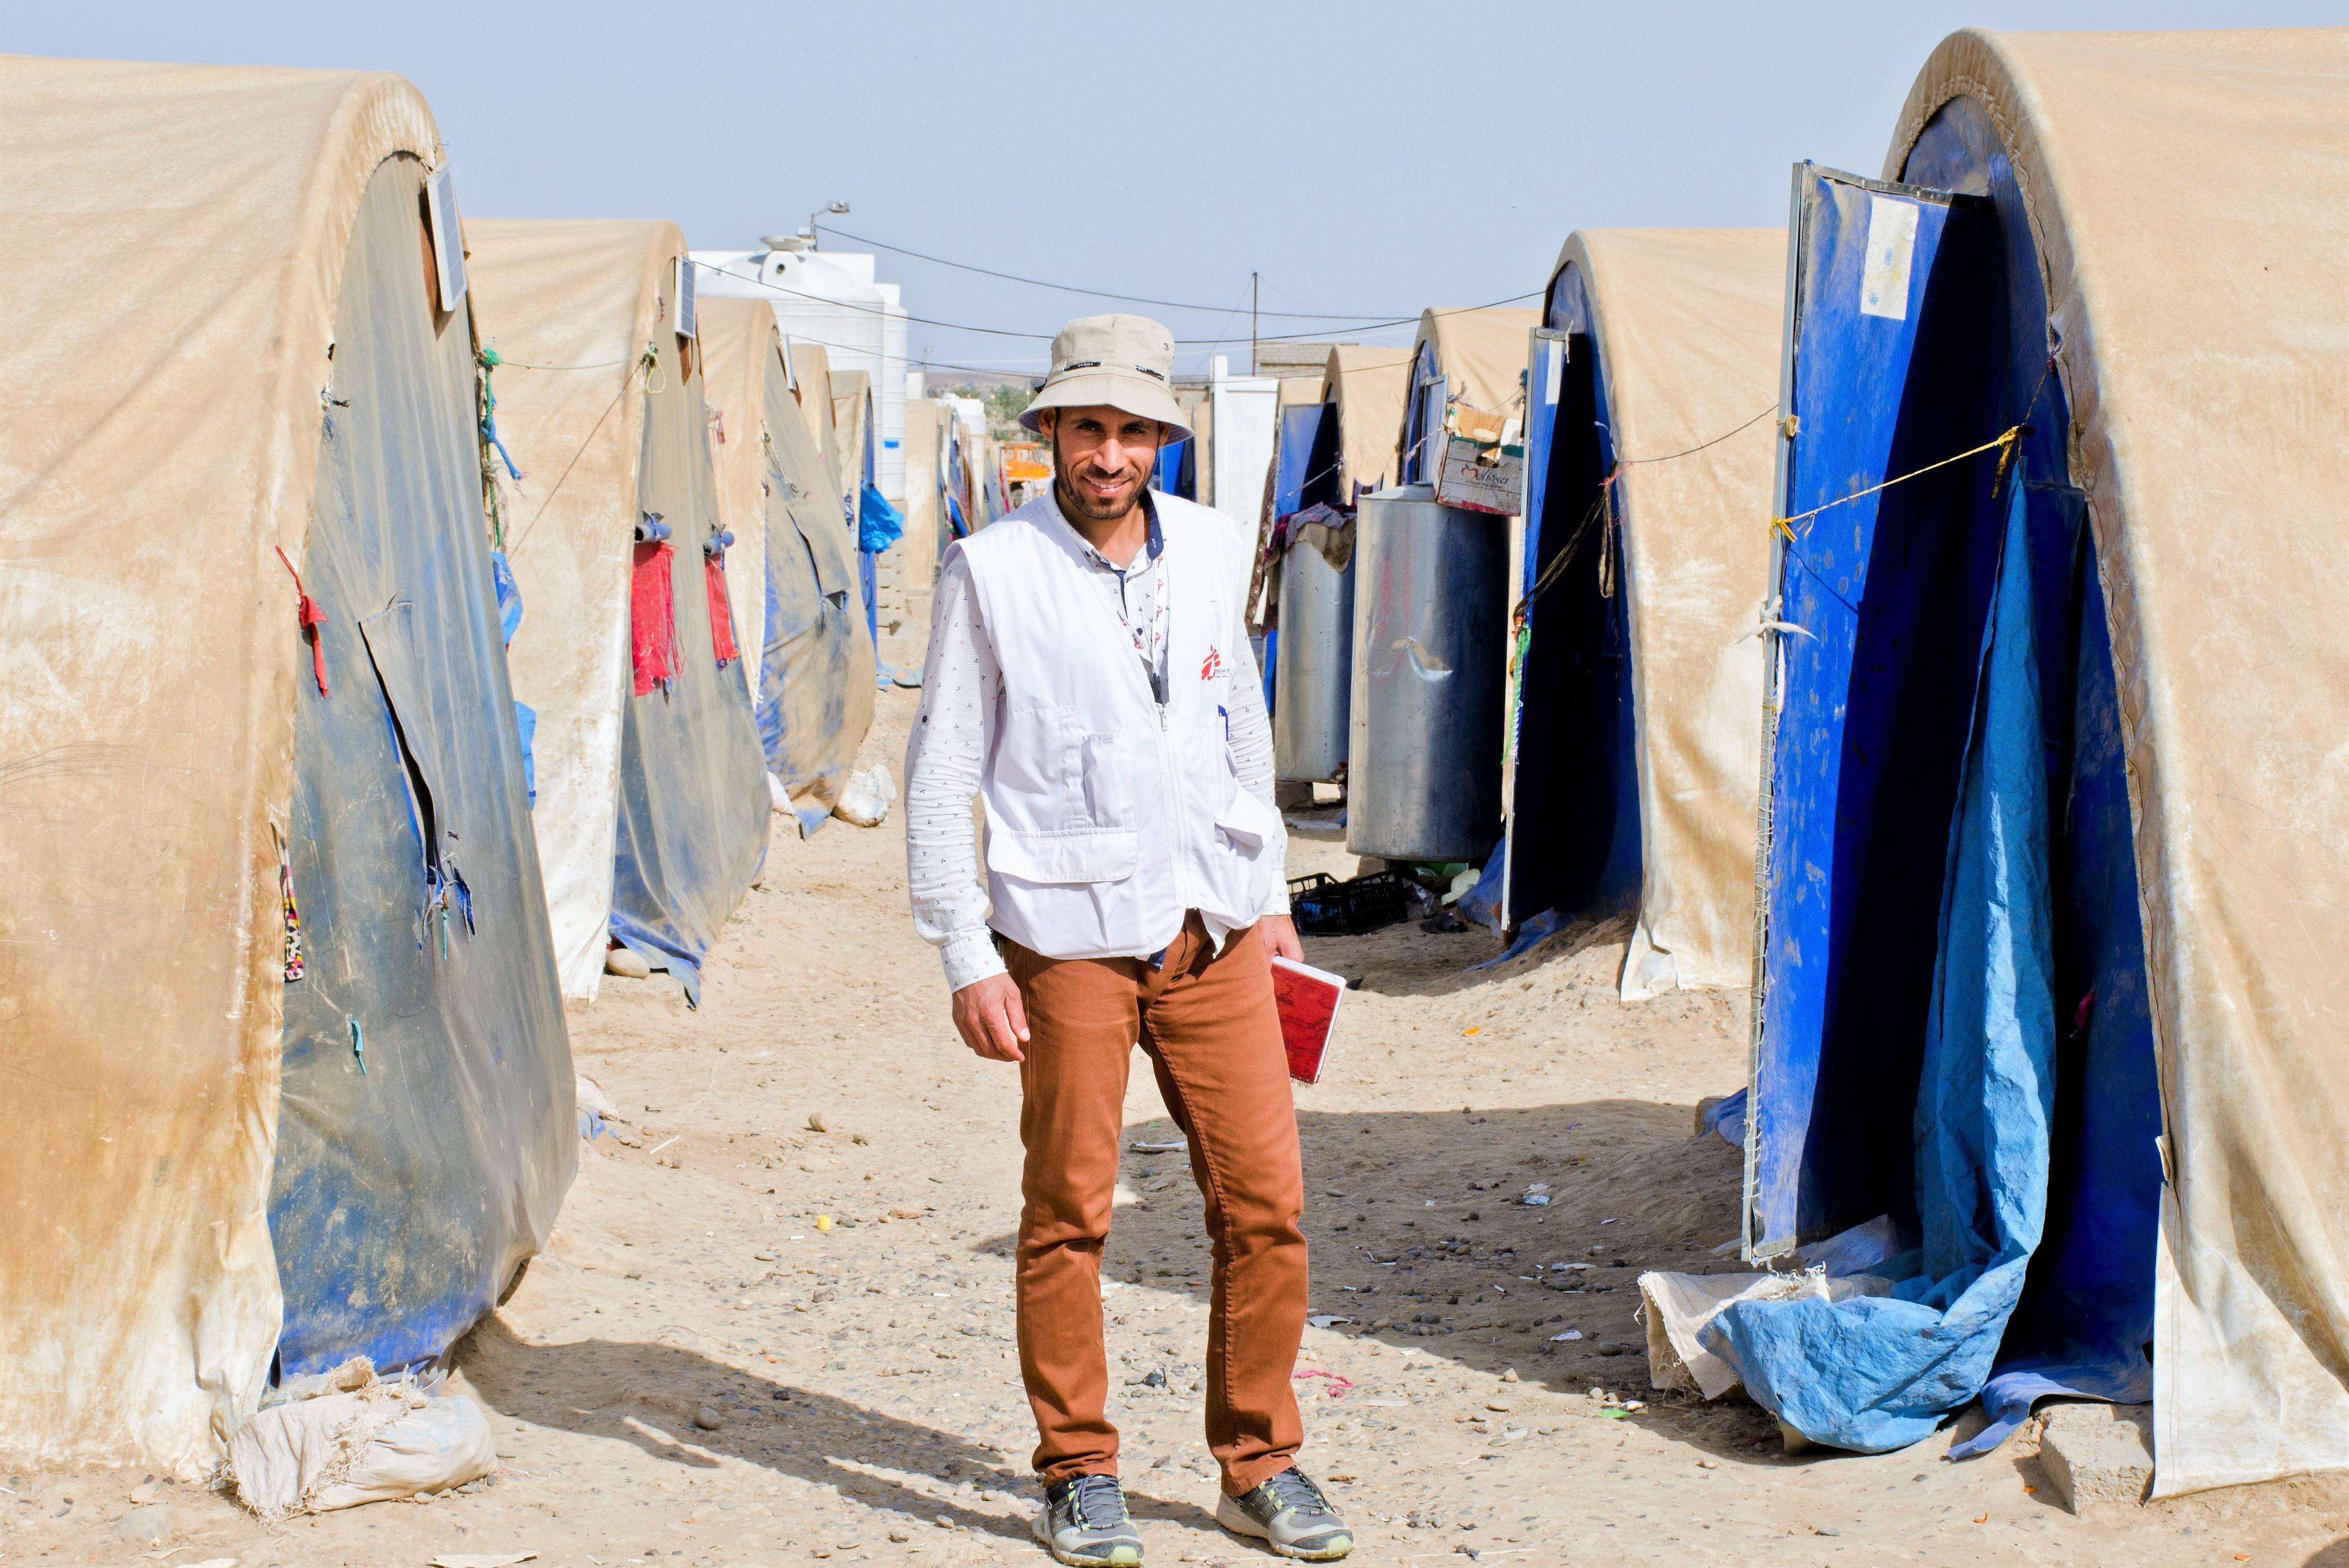 Ali, pictured, is the head of community health workers for Doctors Without Borders/ Médecins Sans Frontières (MSF) working in an IPD camp vaccination campaign in Qayyarah, northern Iraq.